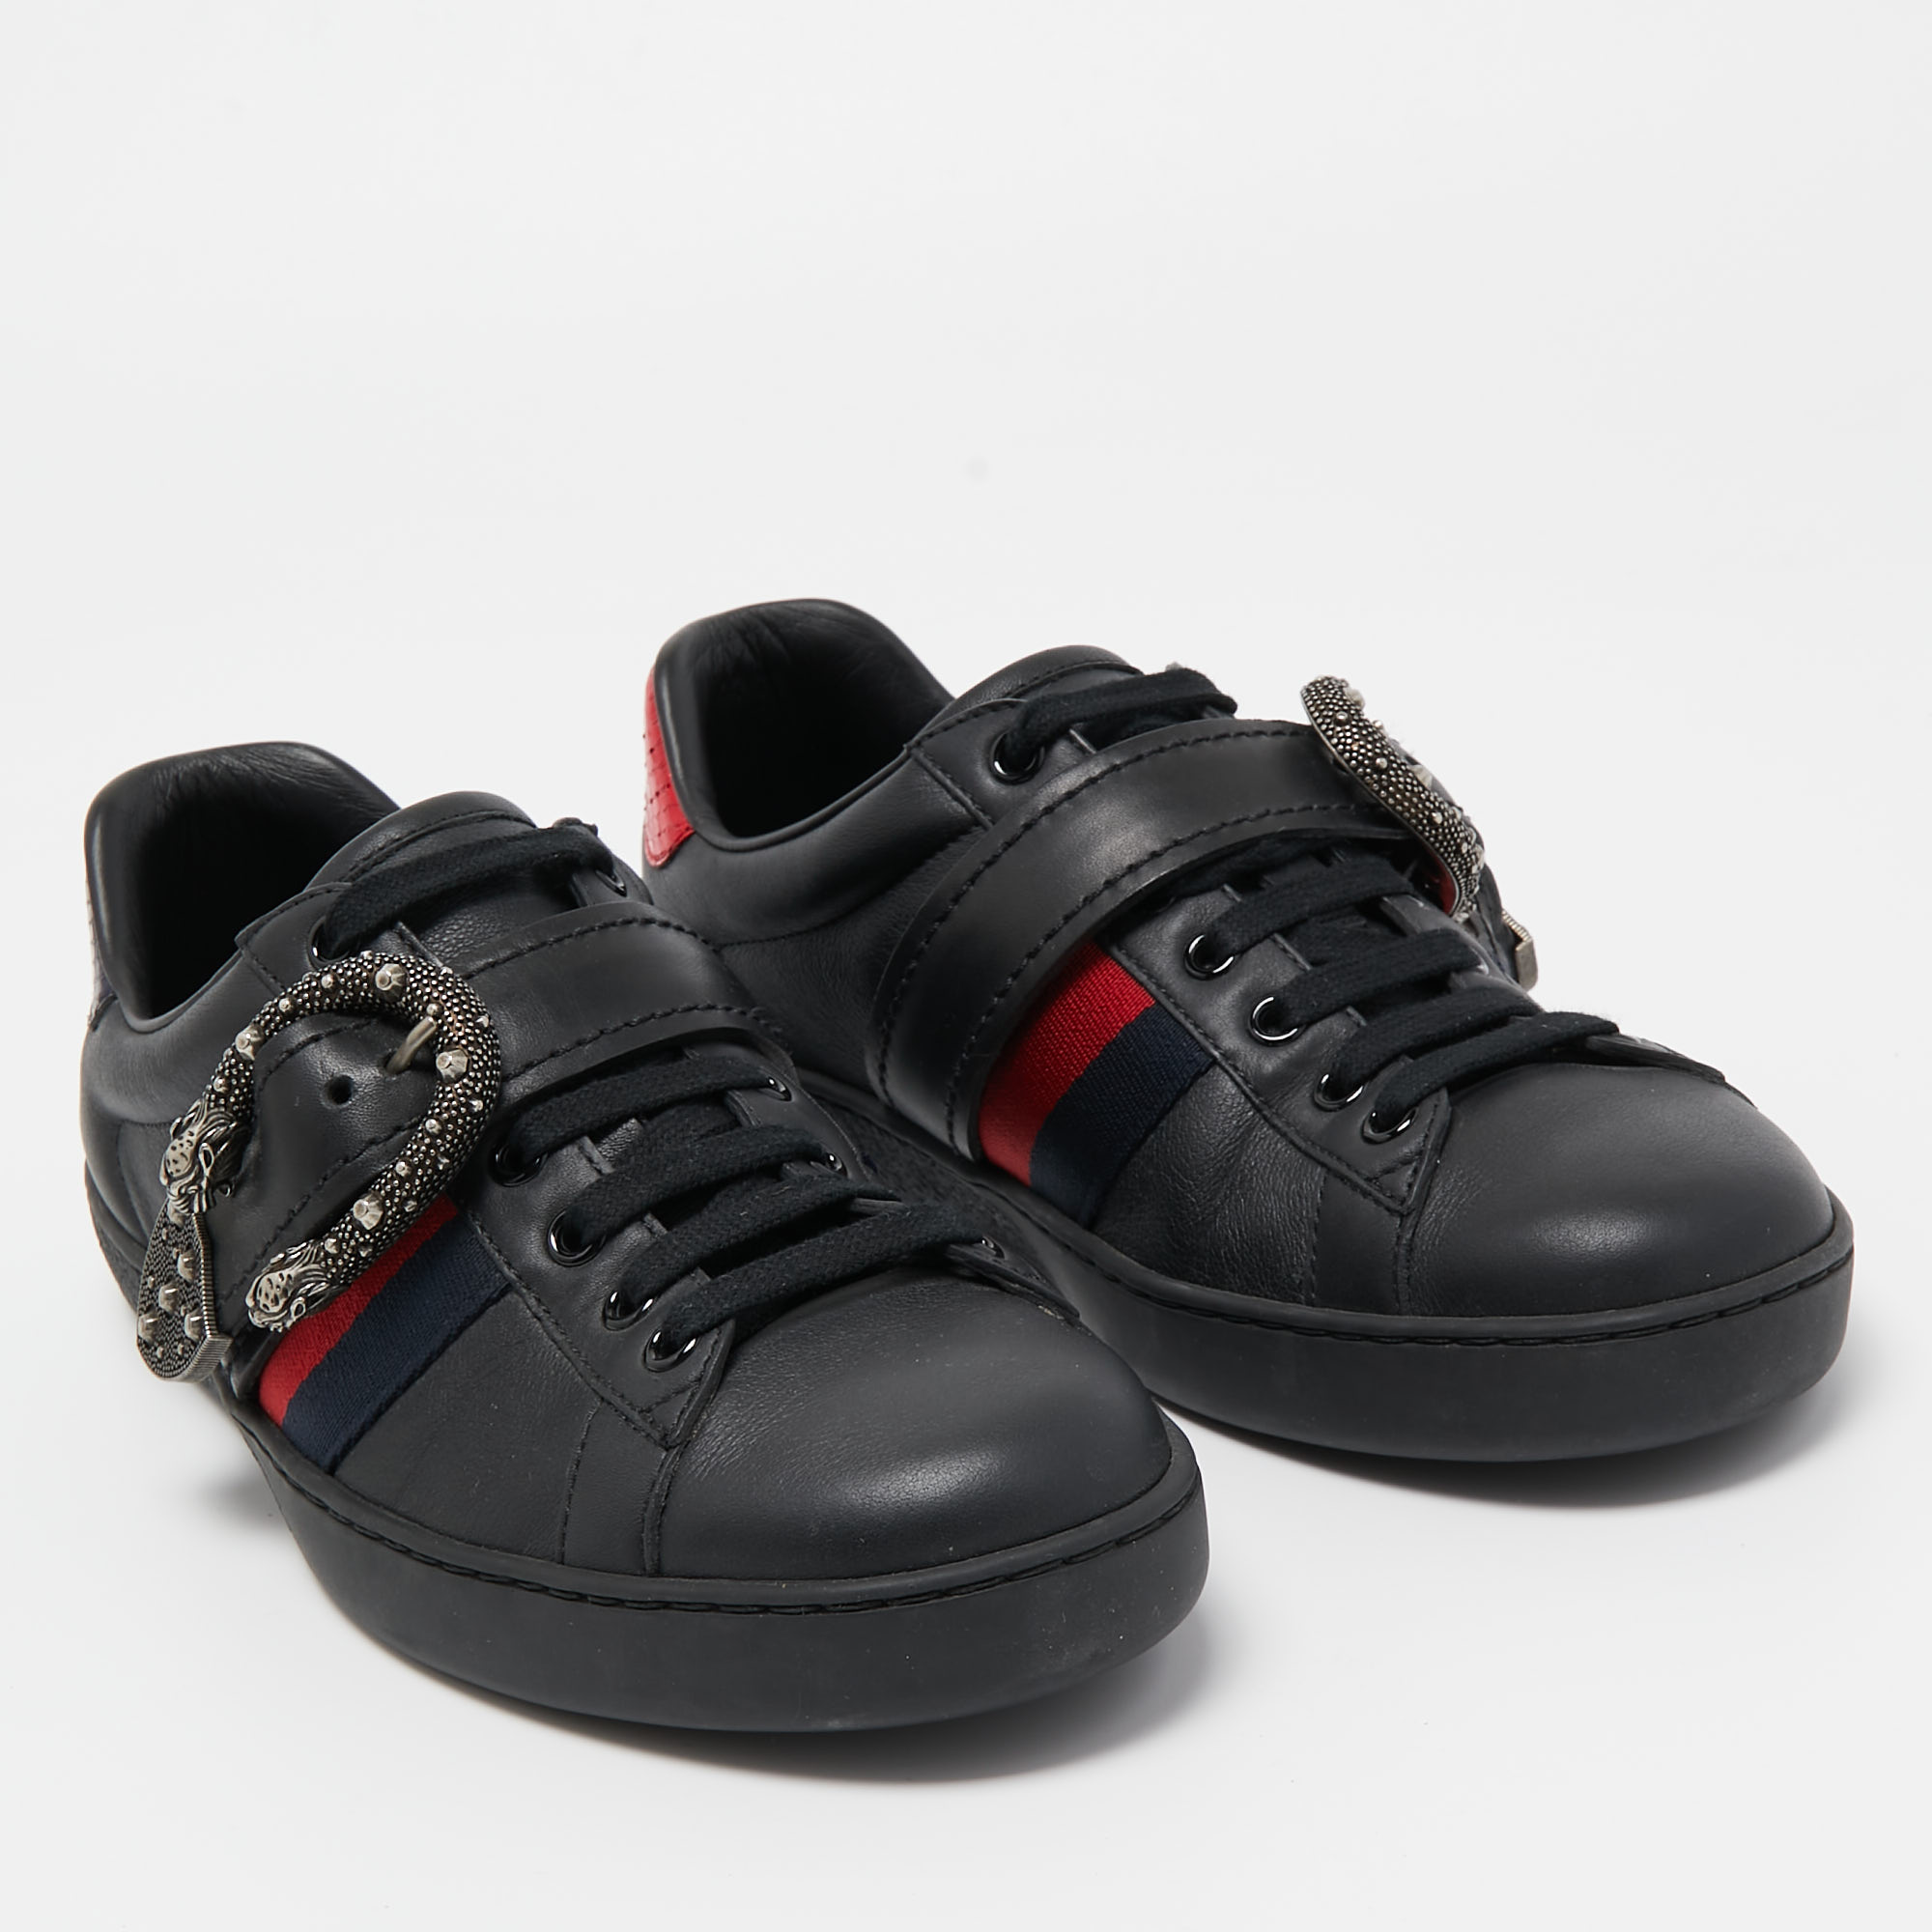 Gucci Black Leather And Python Trim Ace Dionysus Buckle Lace Up Sneakers Size 40.5